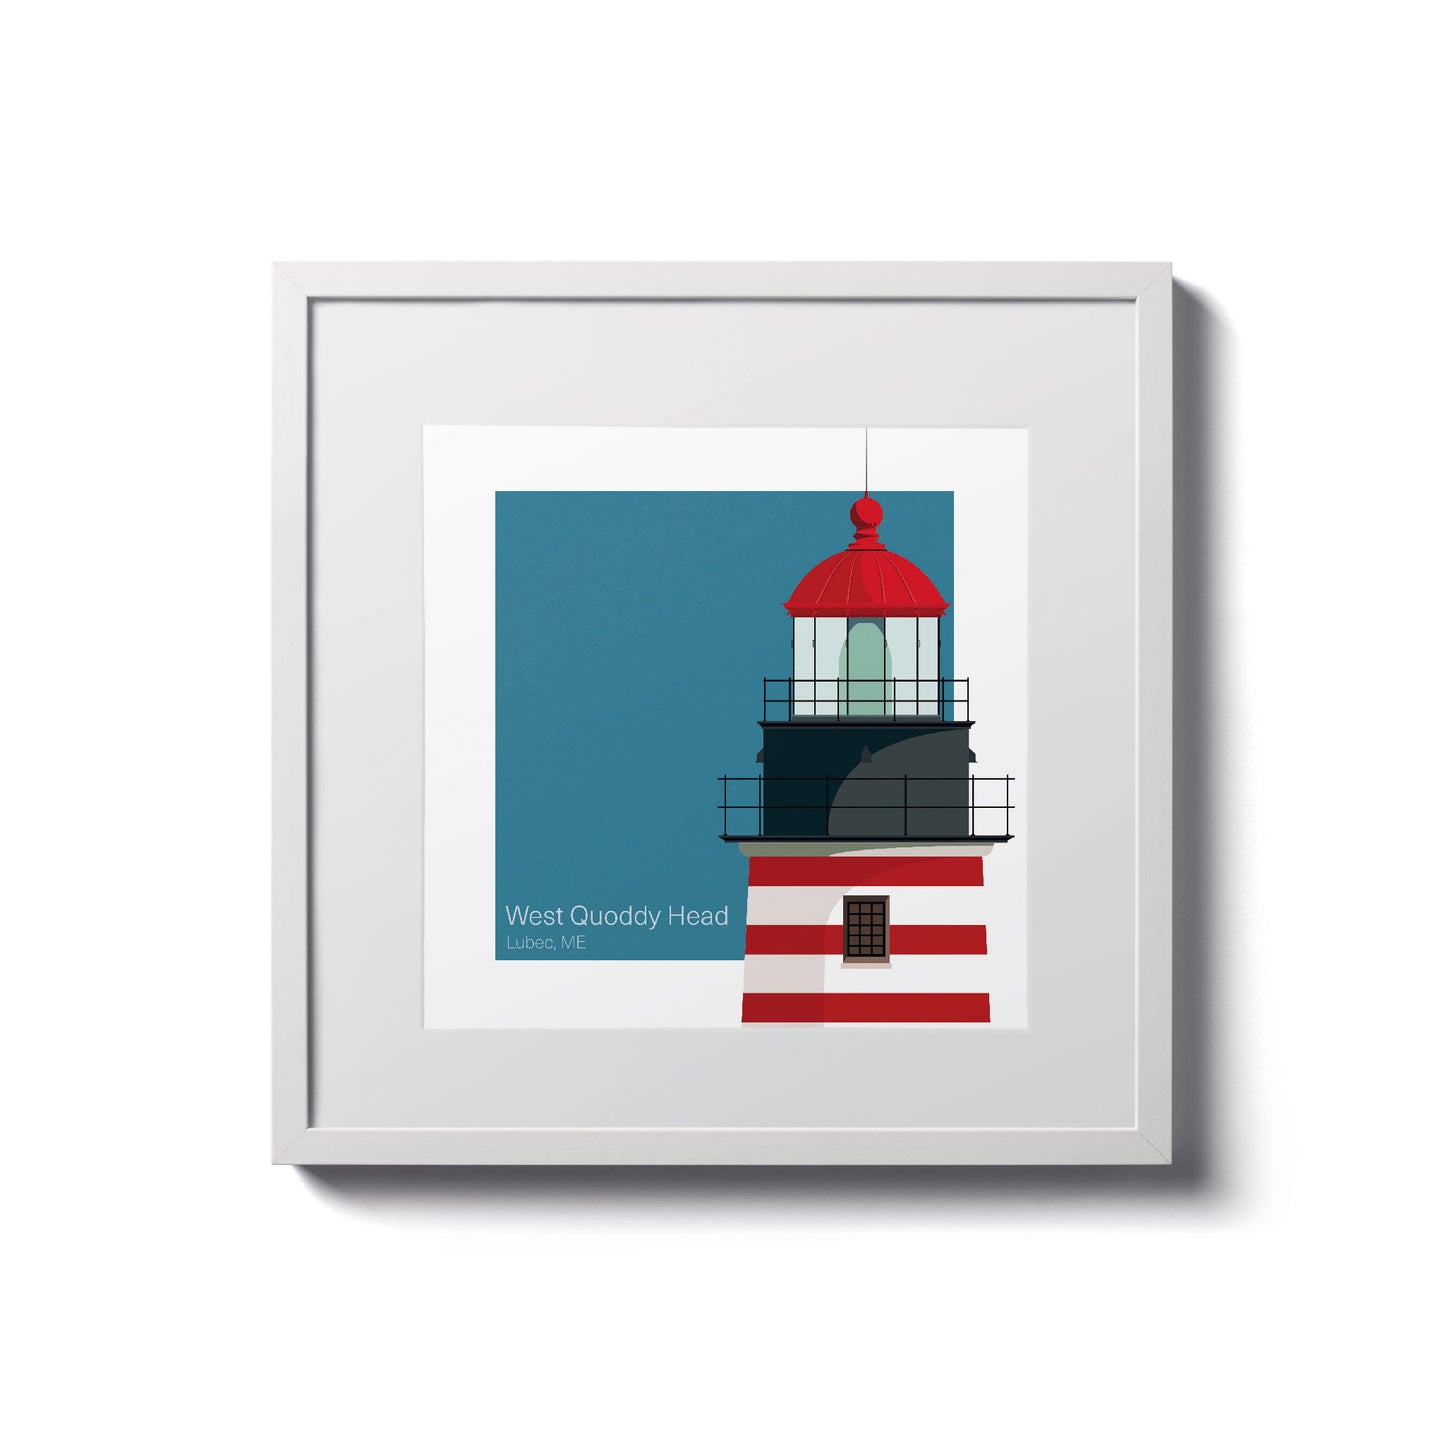 Illustration of the West Quoddy Head lighthouse, ME, USA. On a white background with aqua blue square as a backdrop., in a white frame  and measuring 8"x8" (20x20cm).